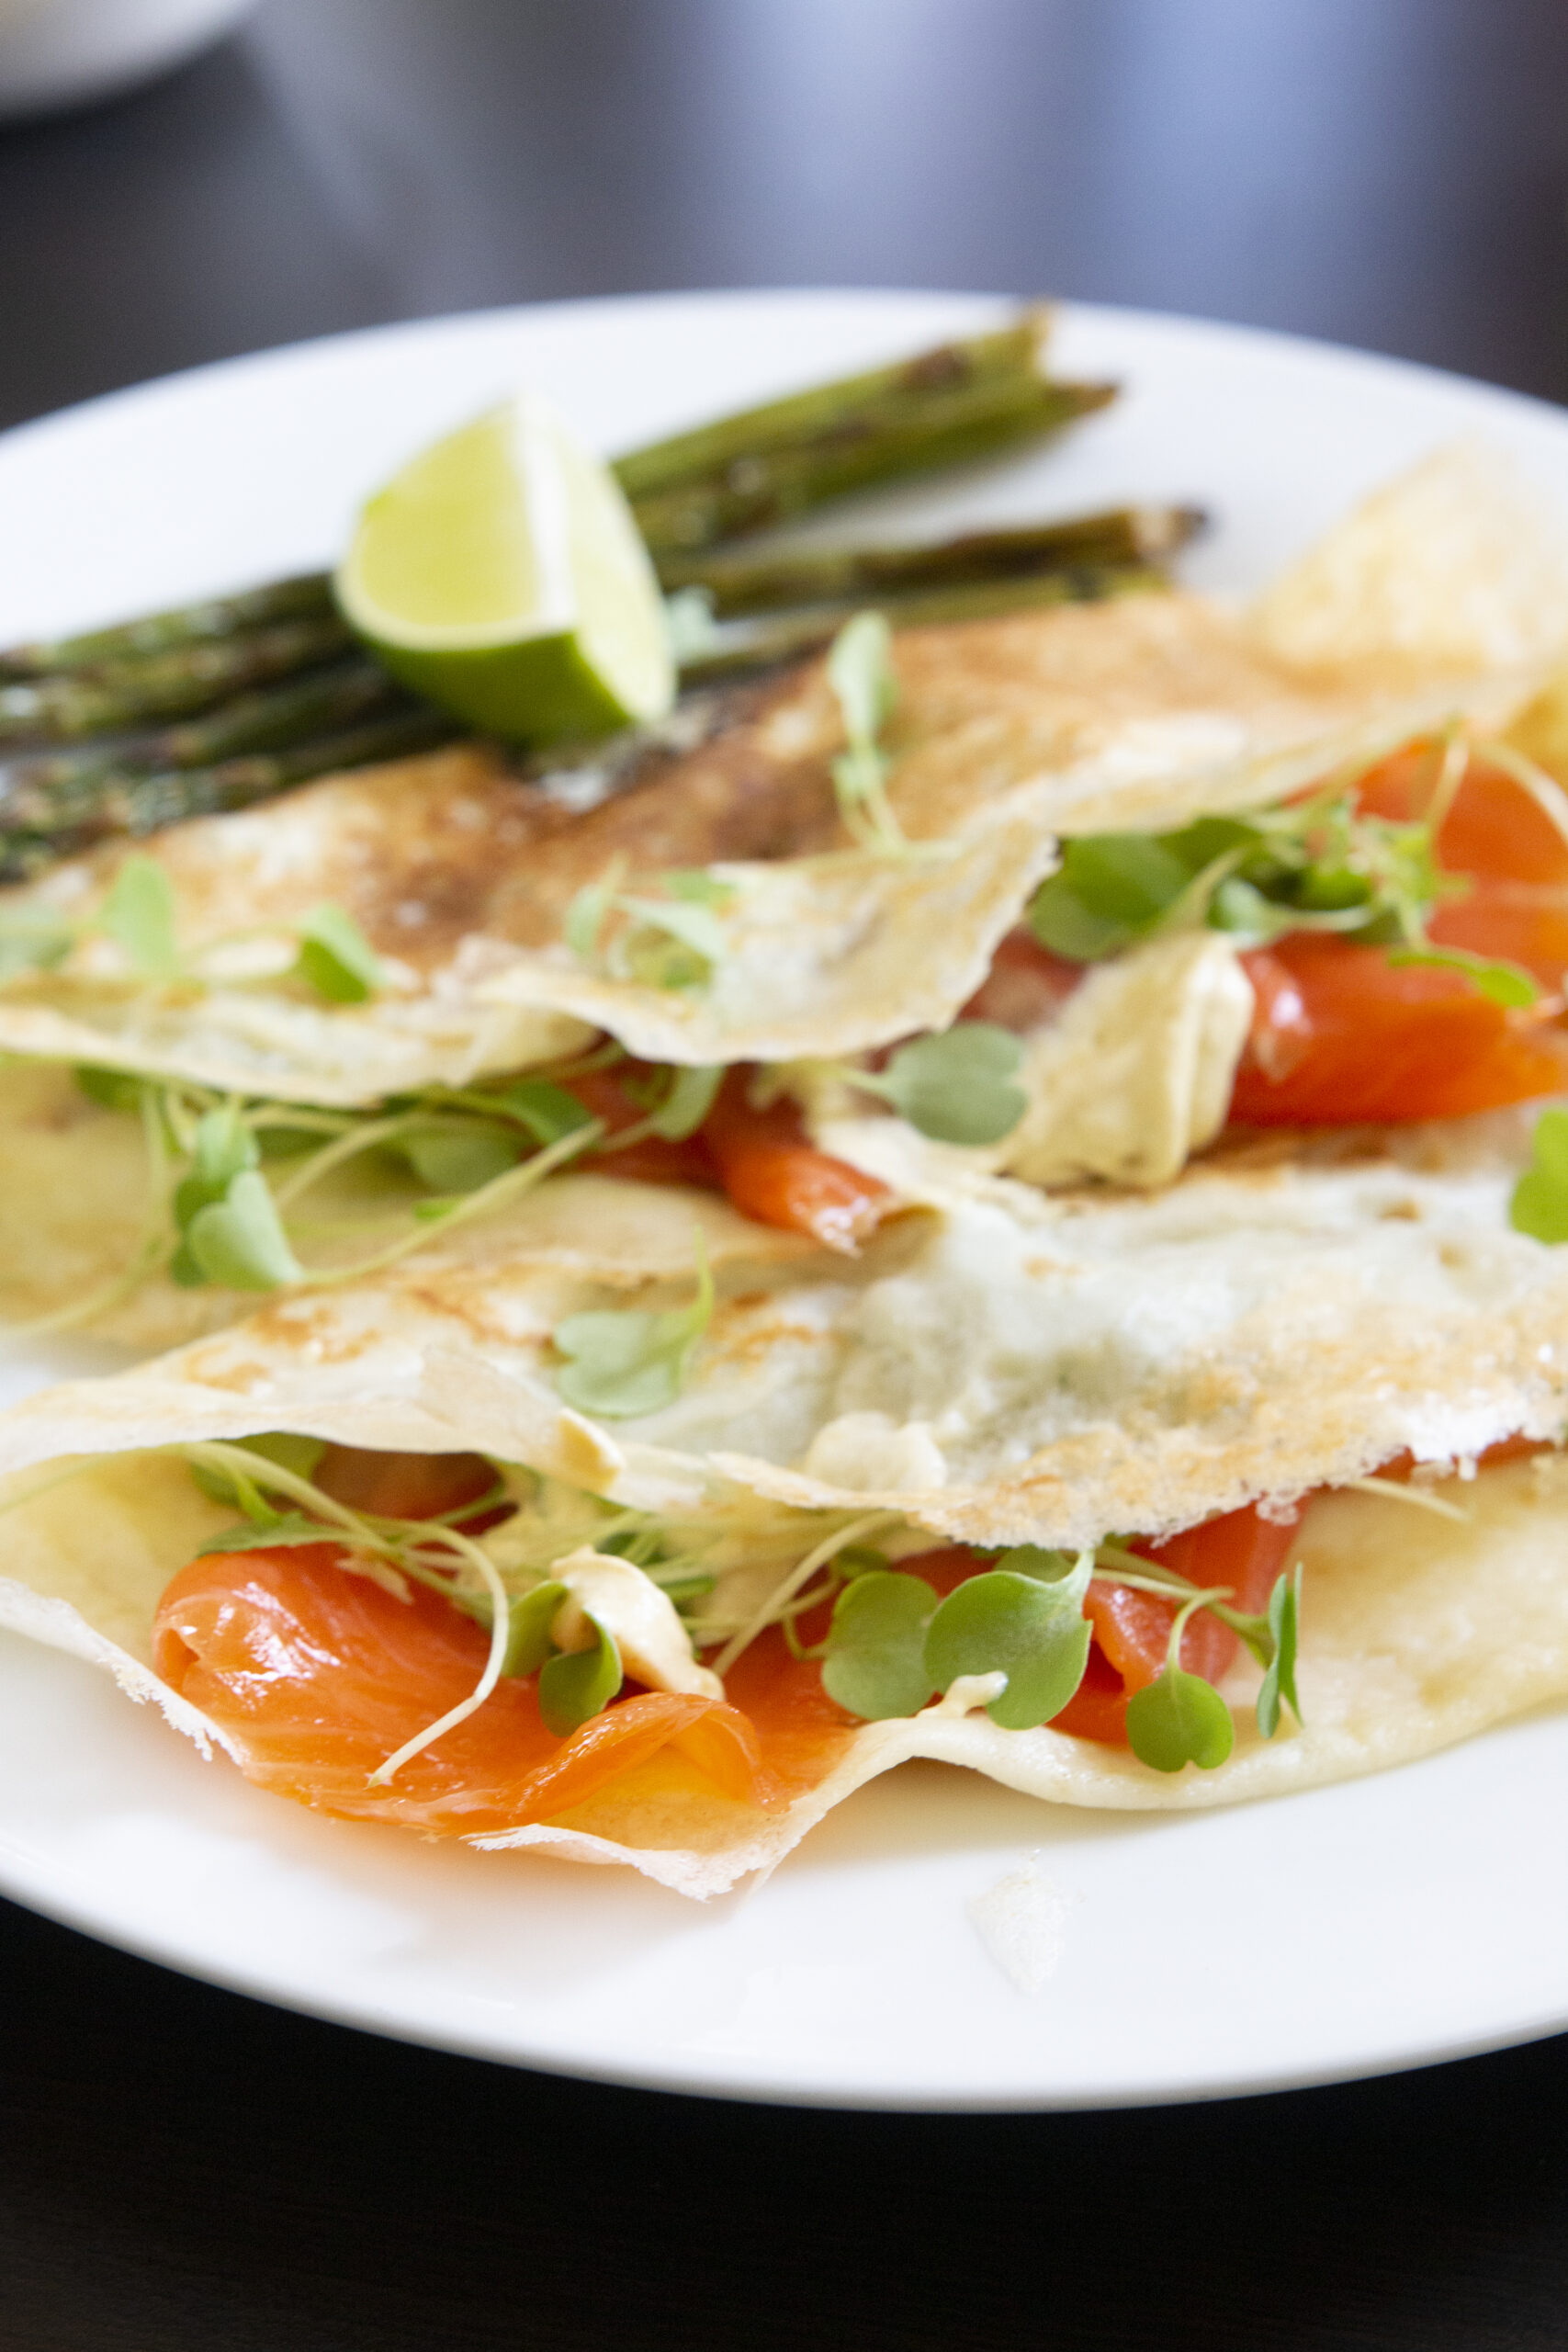 X P Indian 3gp Video Downloading Watch Online Free - Smoked Salmon Crepes with Creamy Mustard Sauce - Kravings Food Adventures